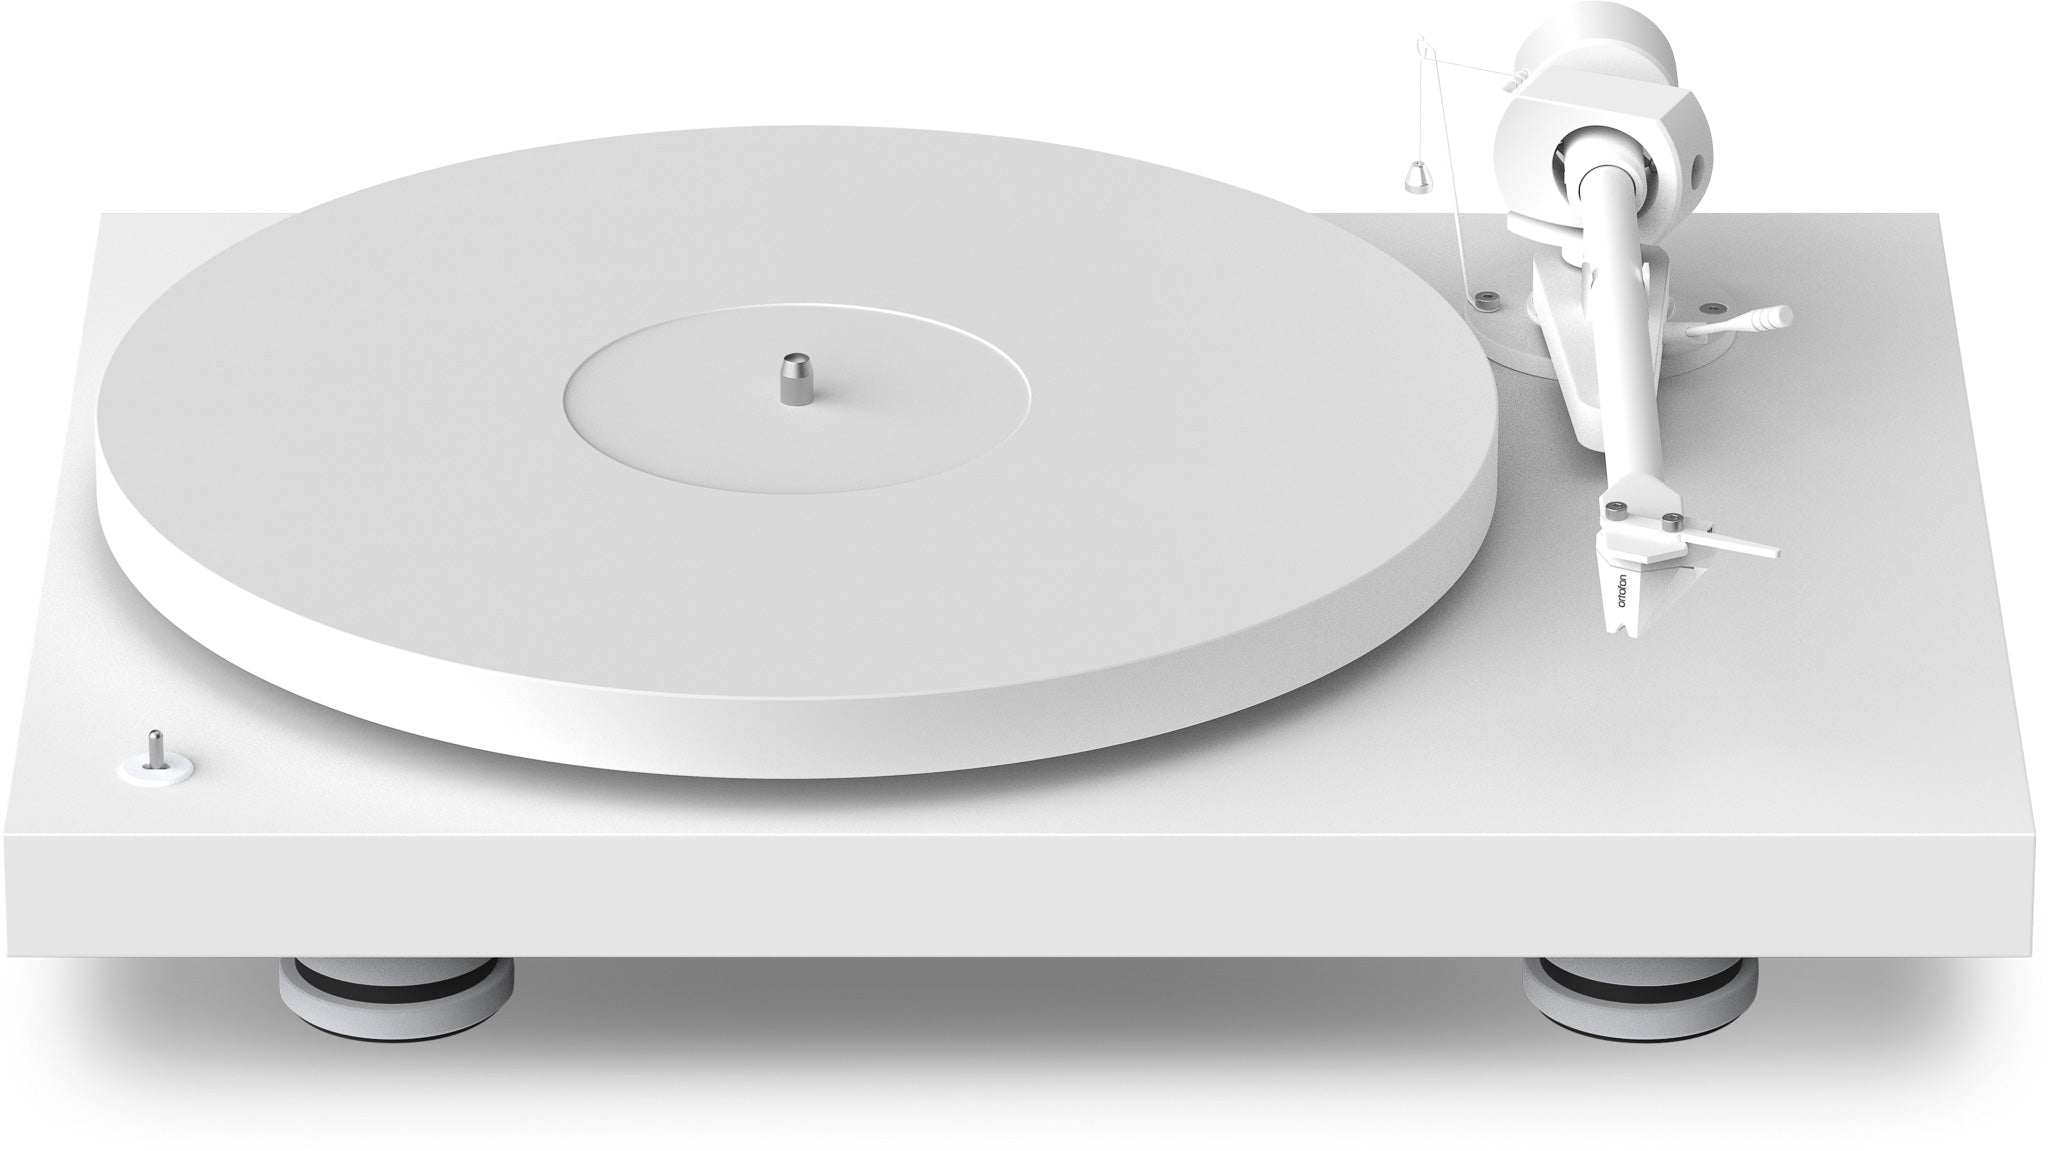 Pro-Ject Debut PRO turntable